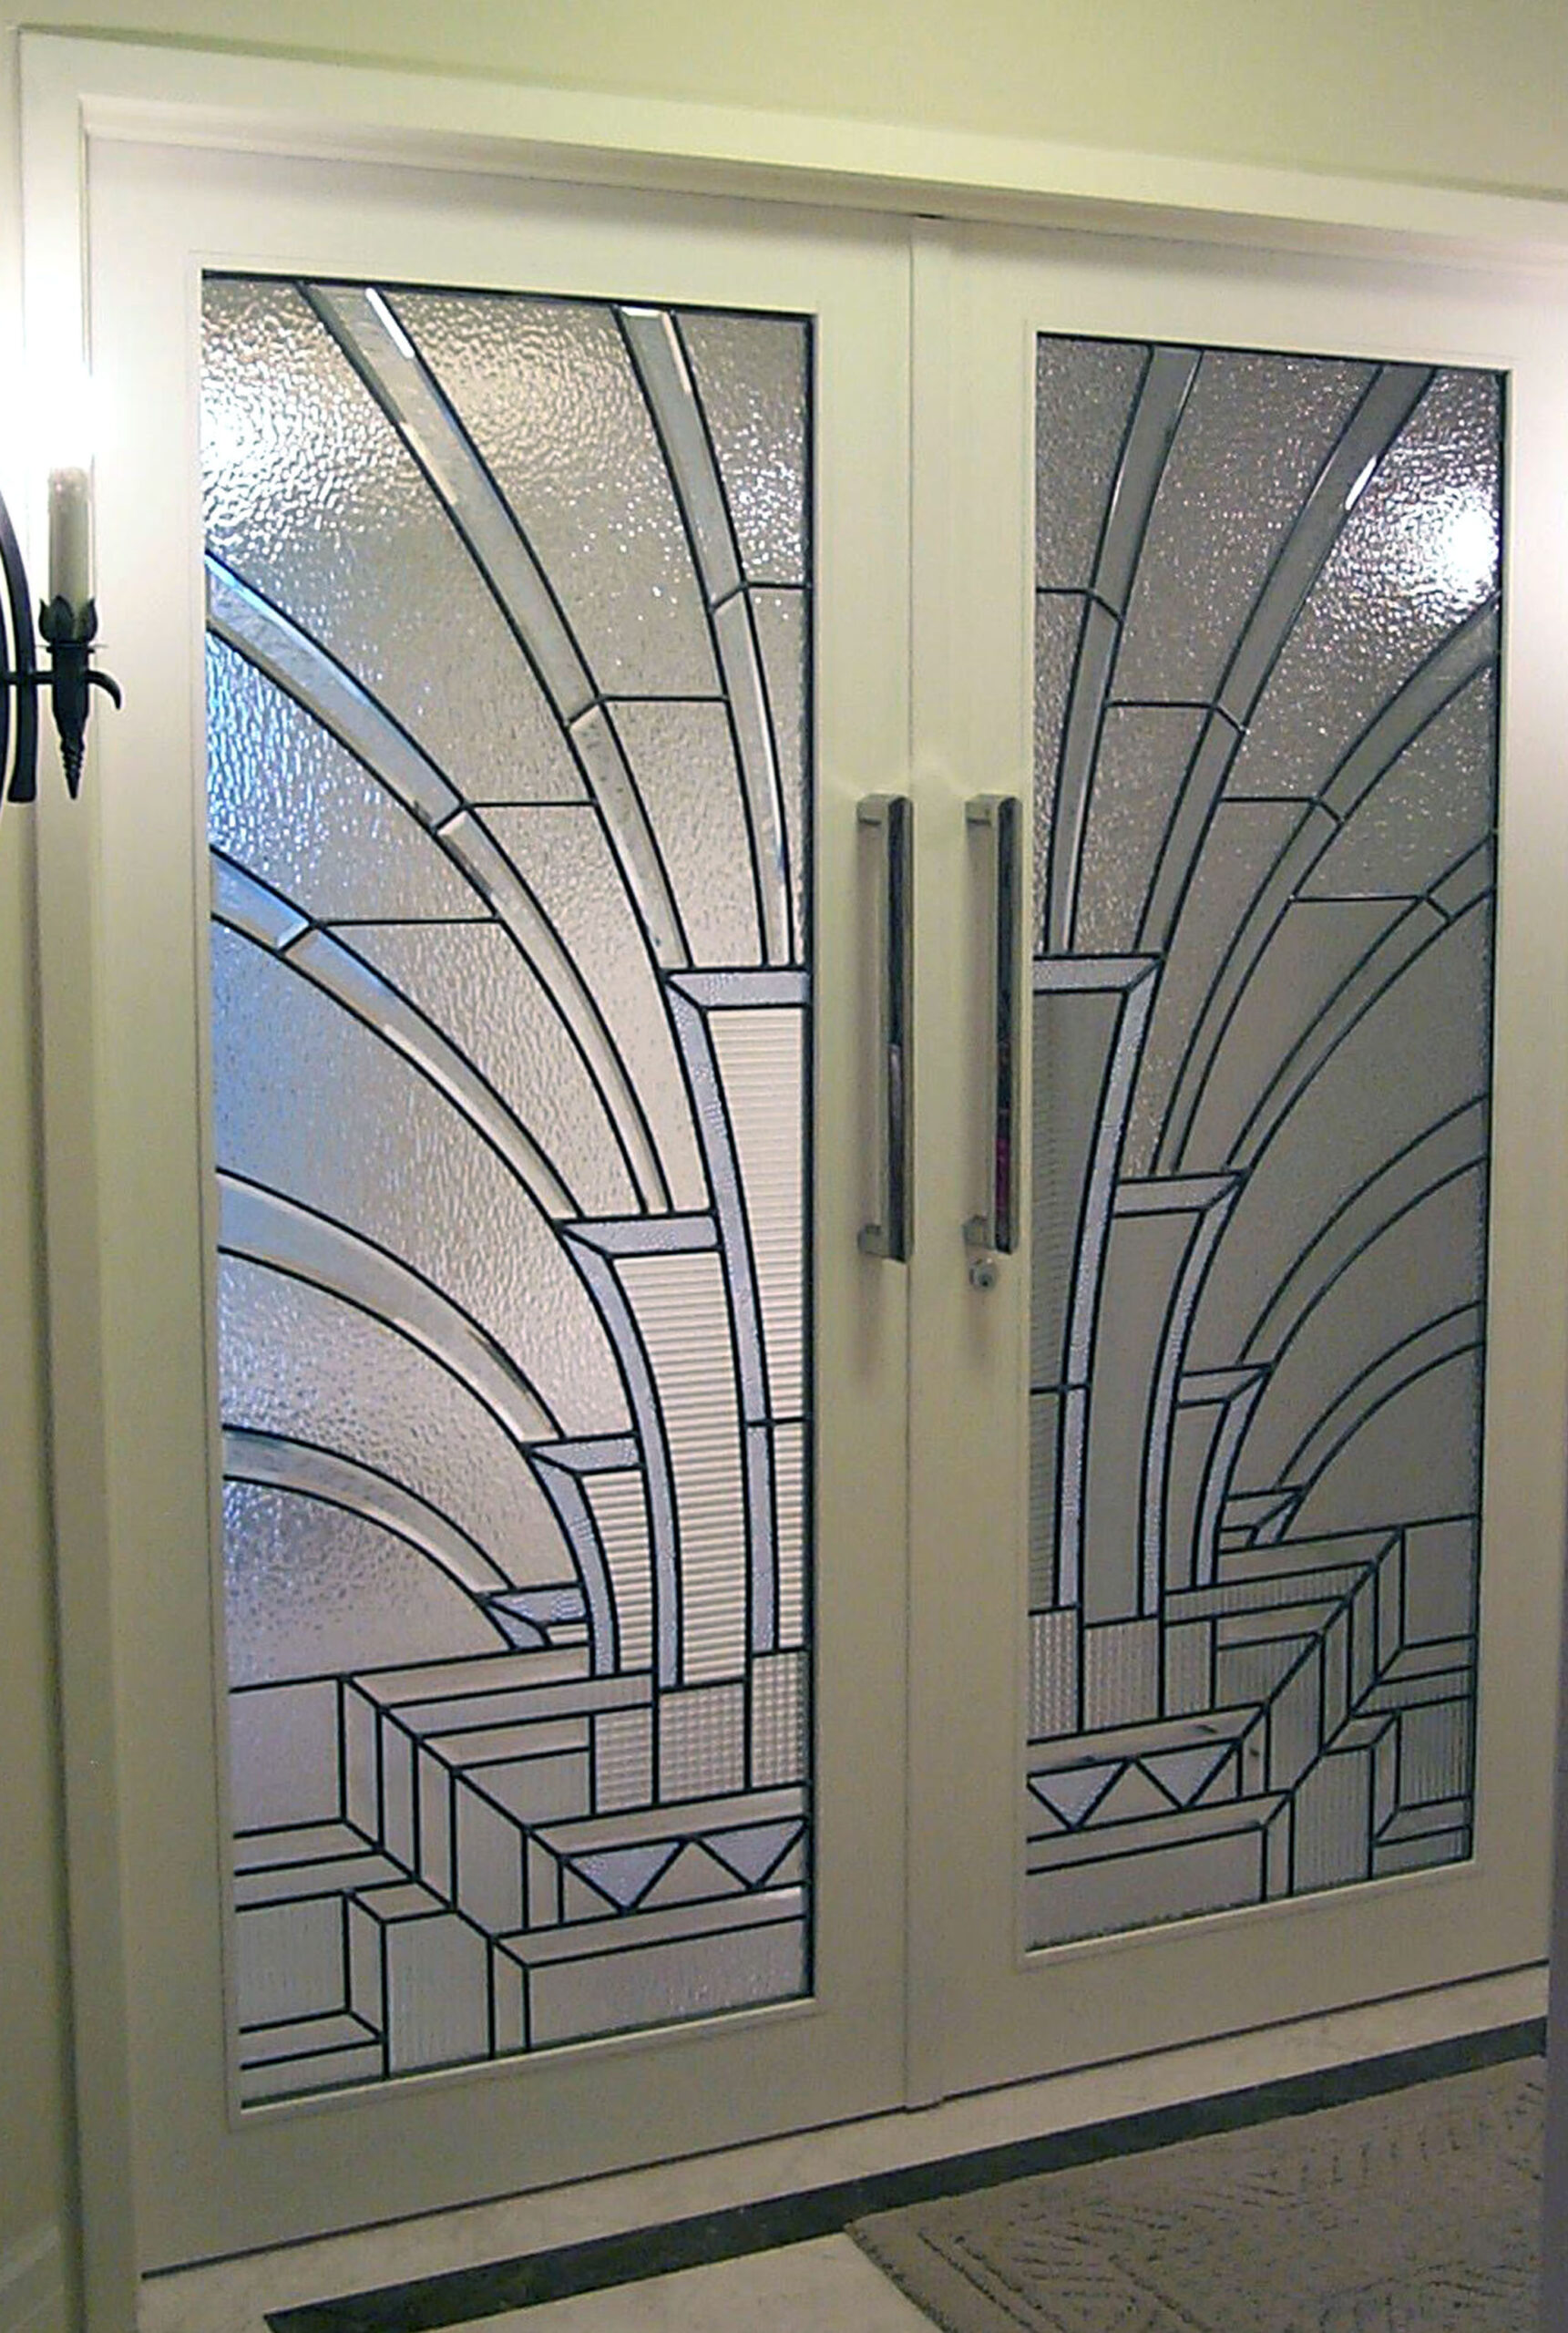 Doorway with clear textured glass in an art deco style.